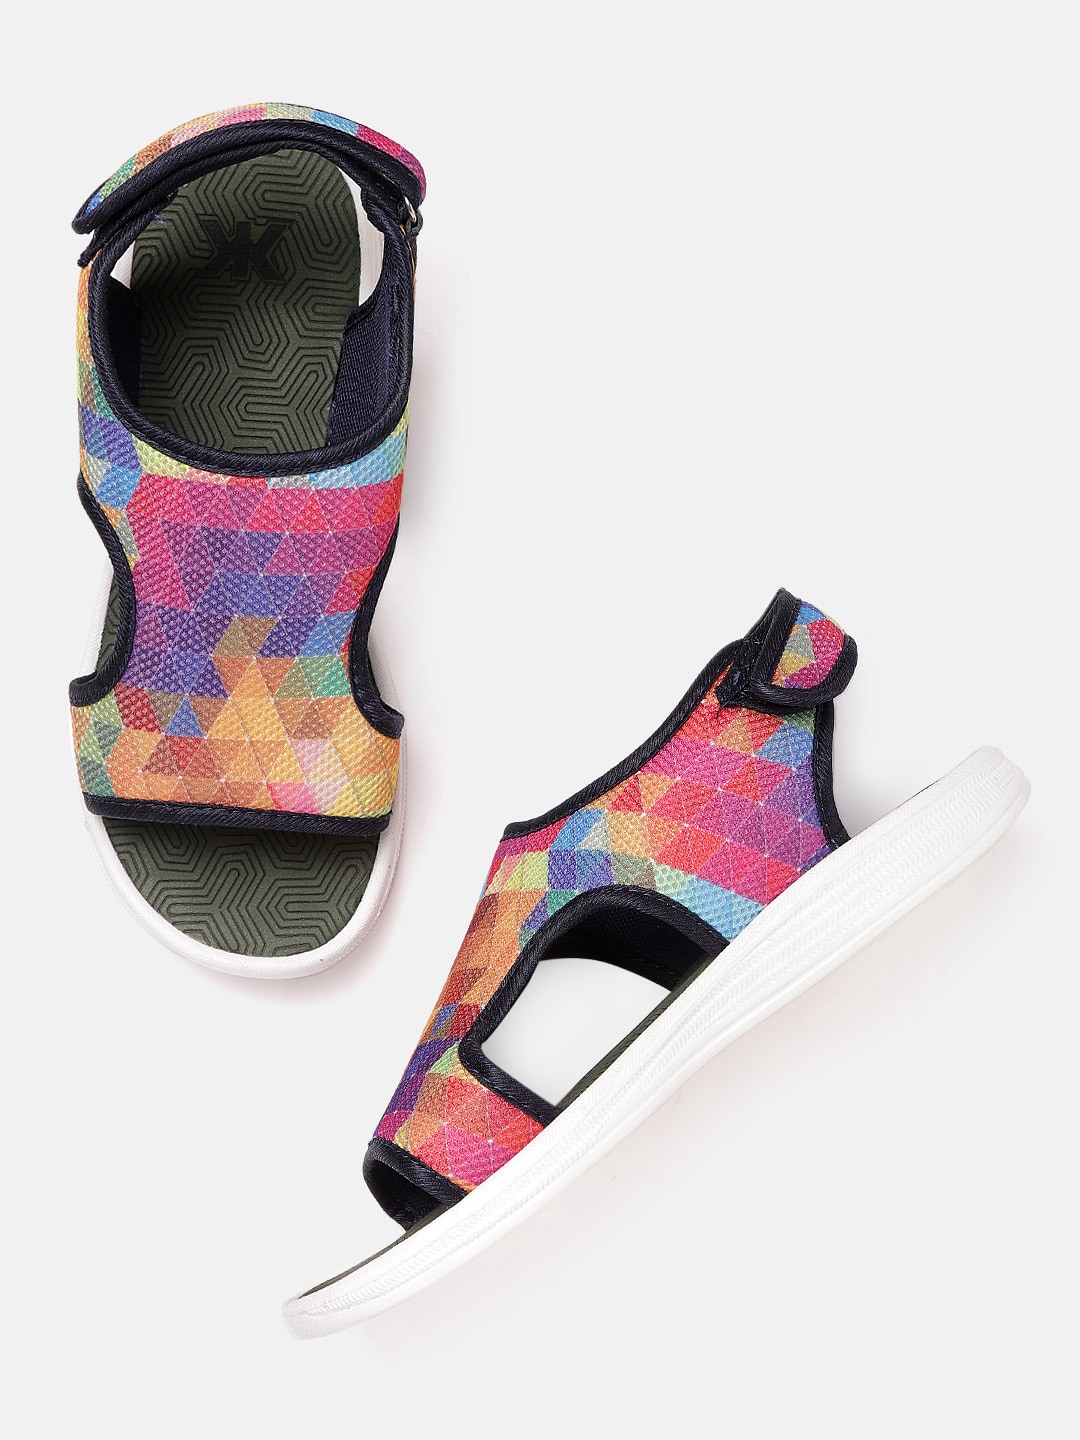 Kook N Keech Women Multicoloured Woven Design Sports Sandals with Cut-Out Price in India